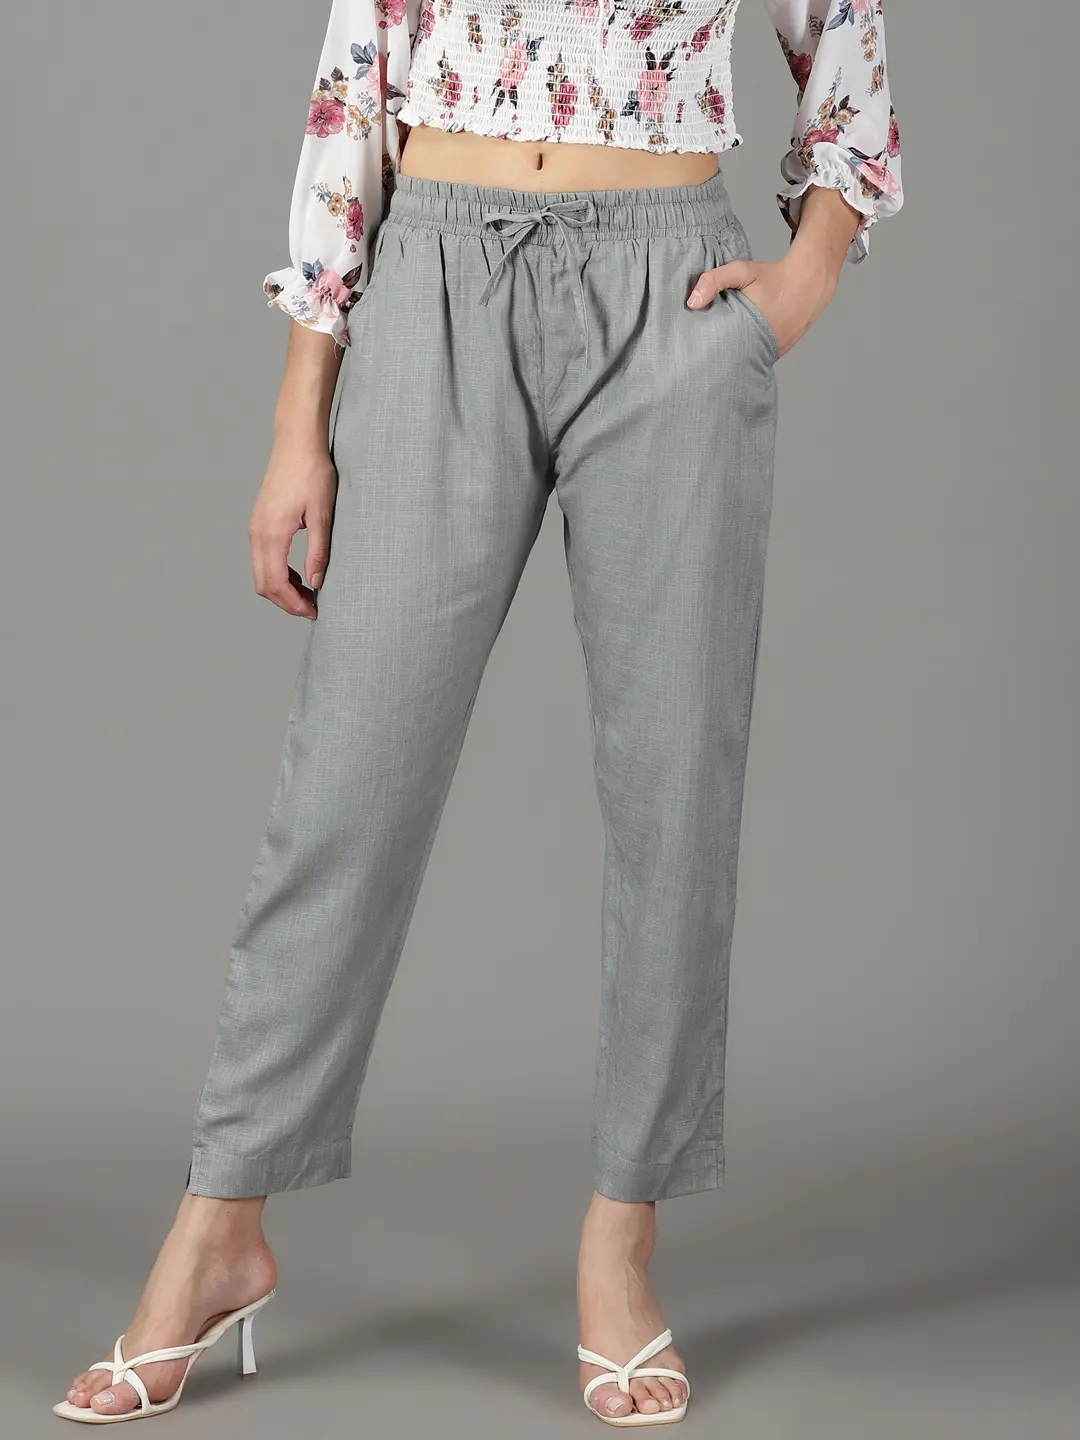 Buy Grey Trousers  Pants for Women by Outryt Online  Ajiocom